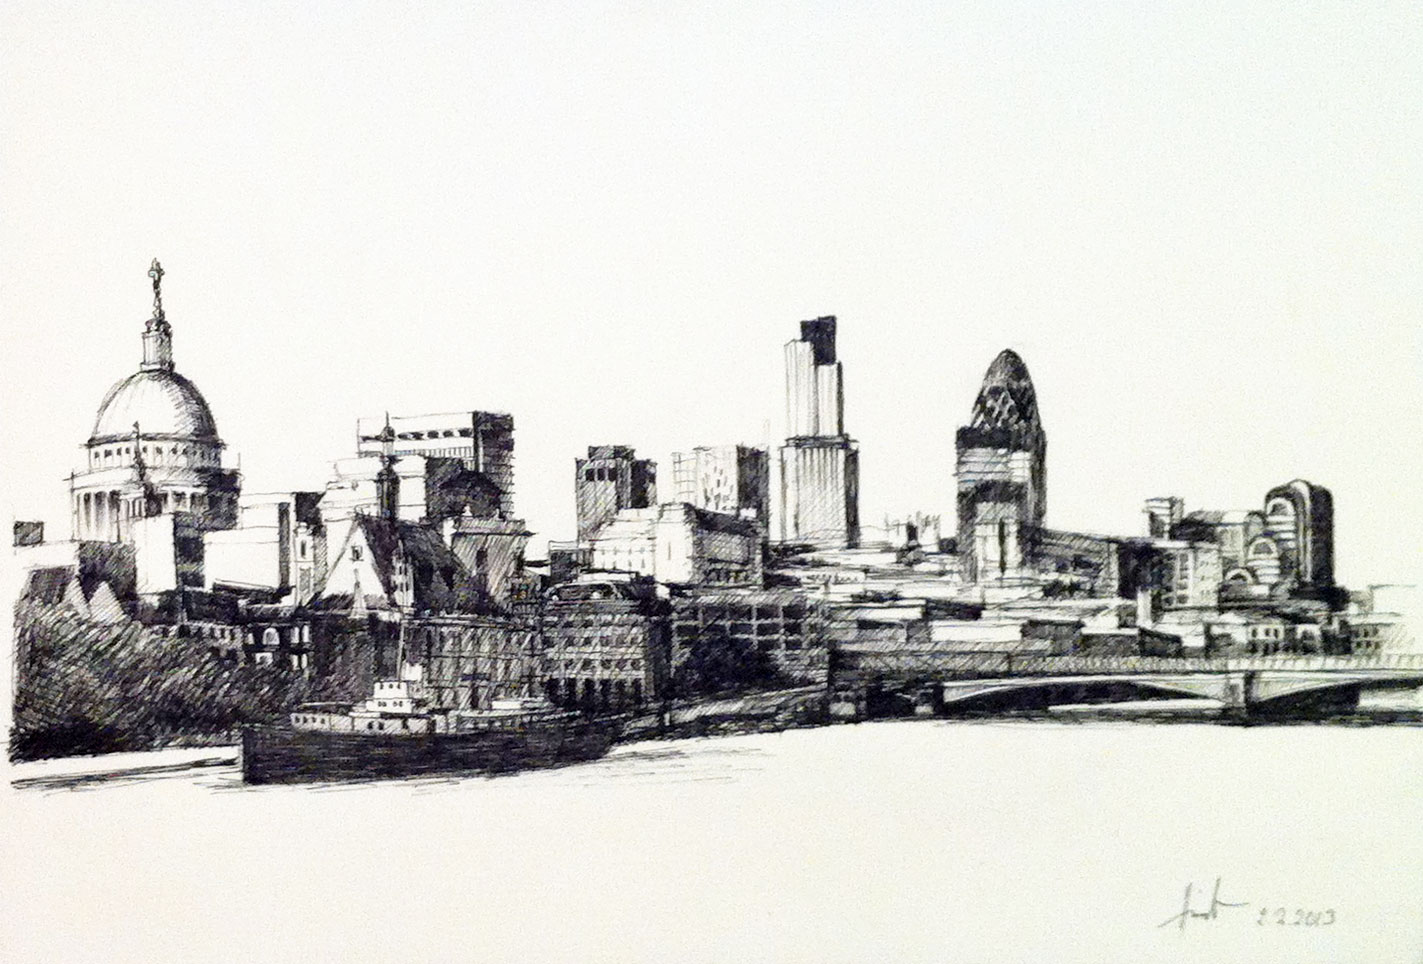 Lovely Artistic Representations of London’s Famous Skyline | Wanderarti